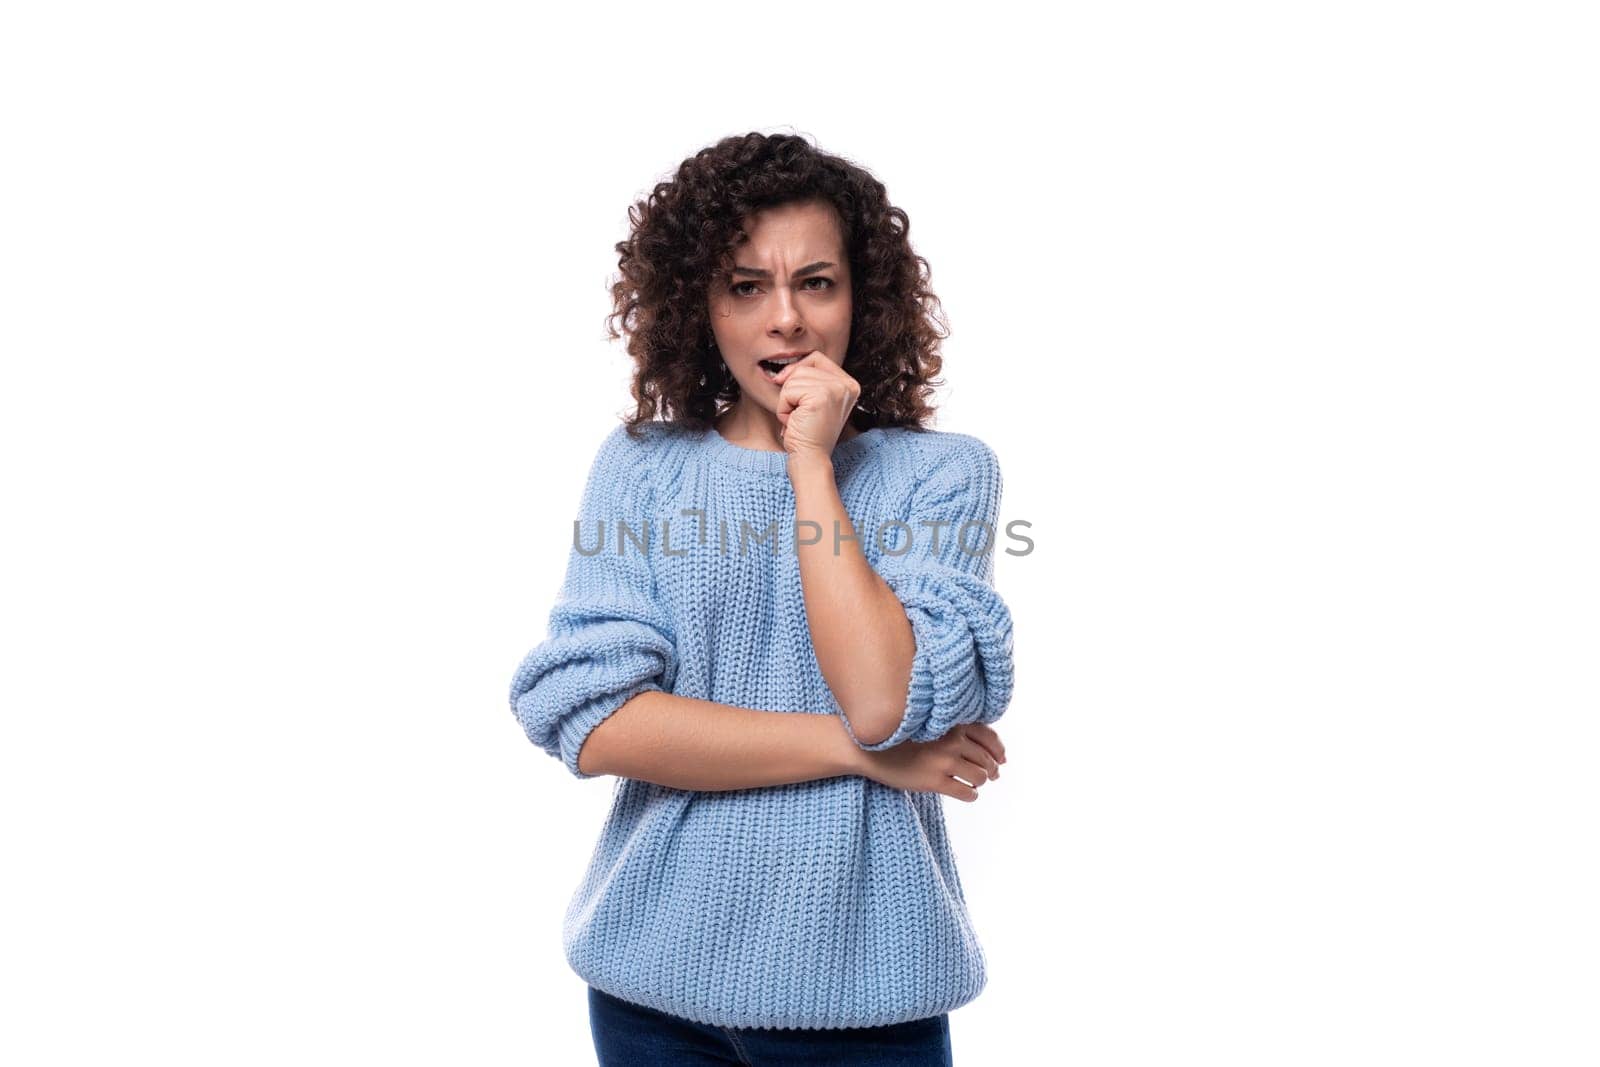 a young brunette woman with curls is dressed in a blue knitted sweater is brainstorming.